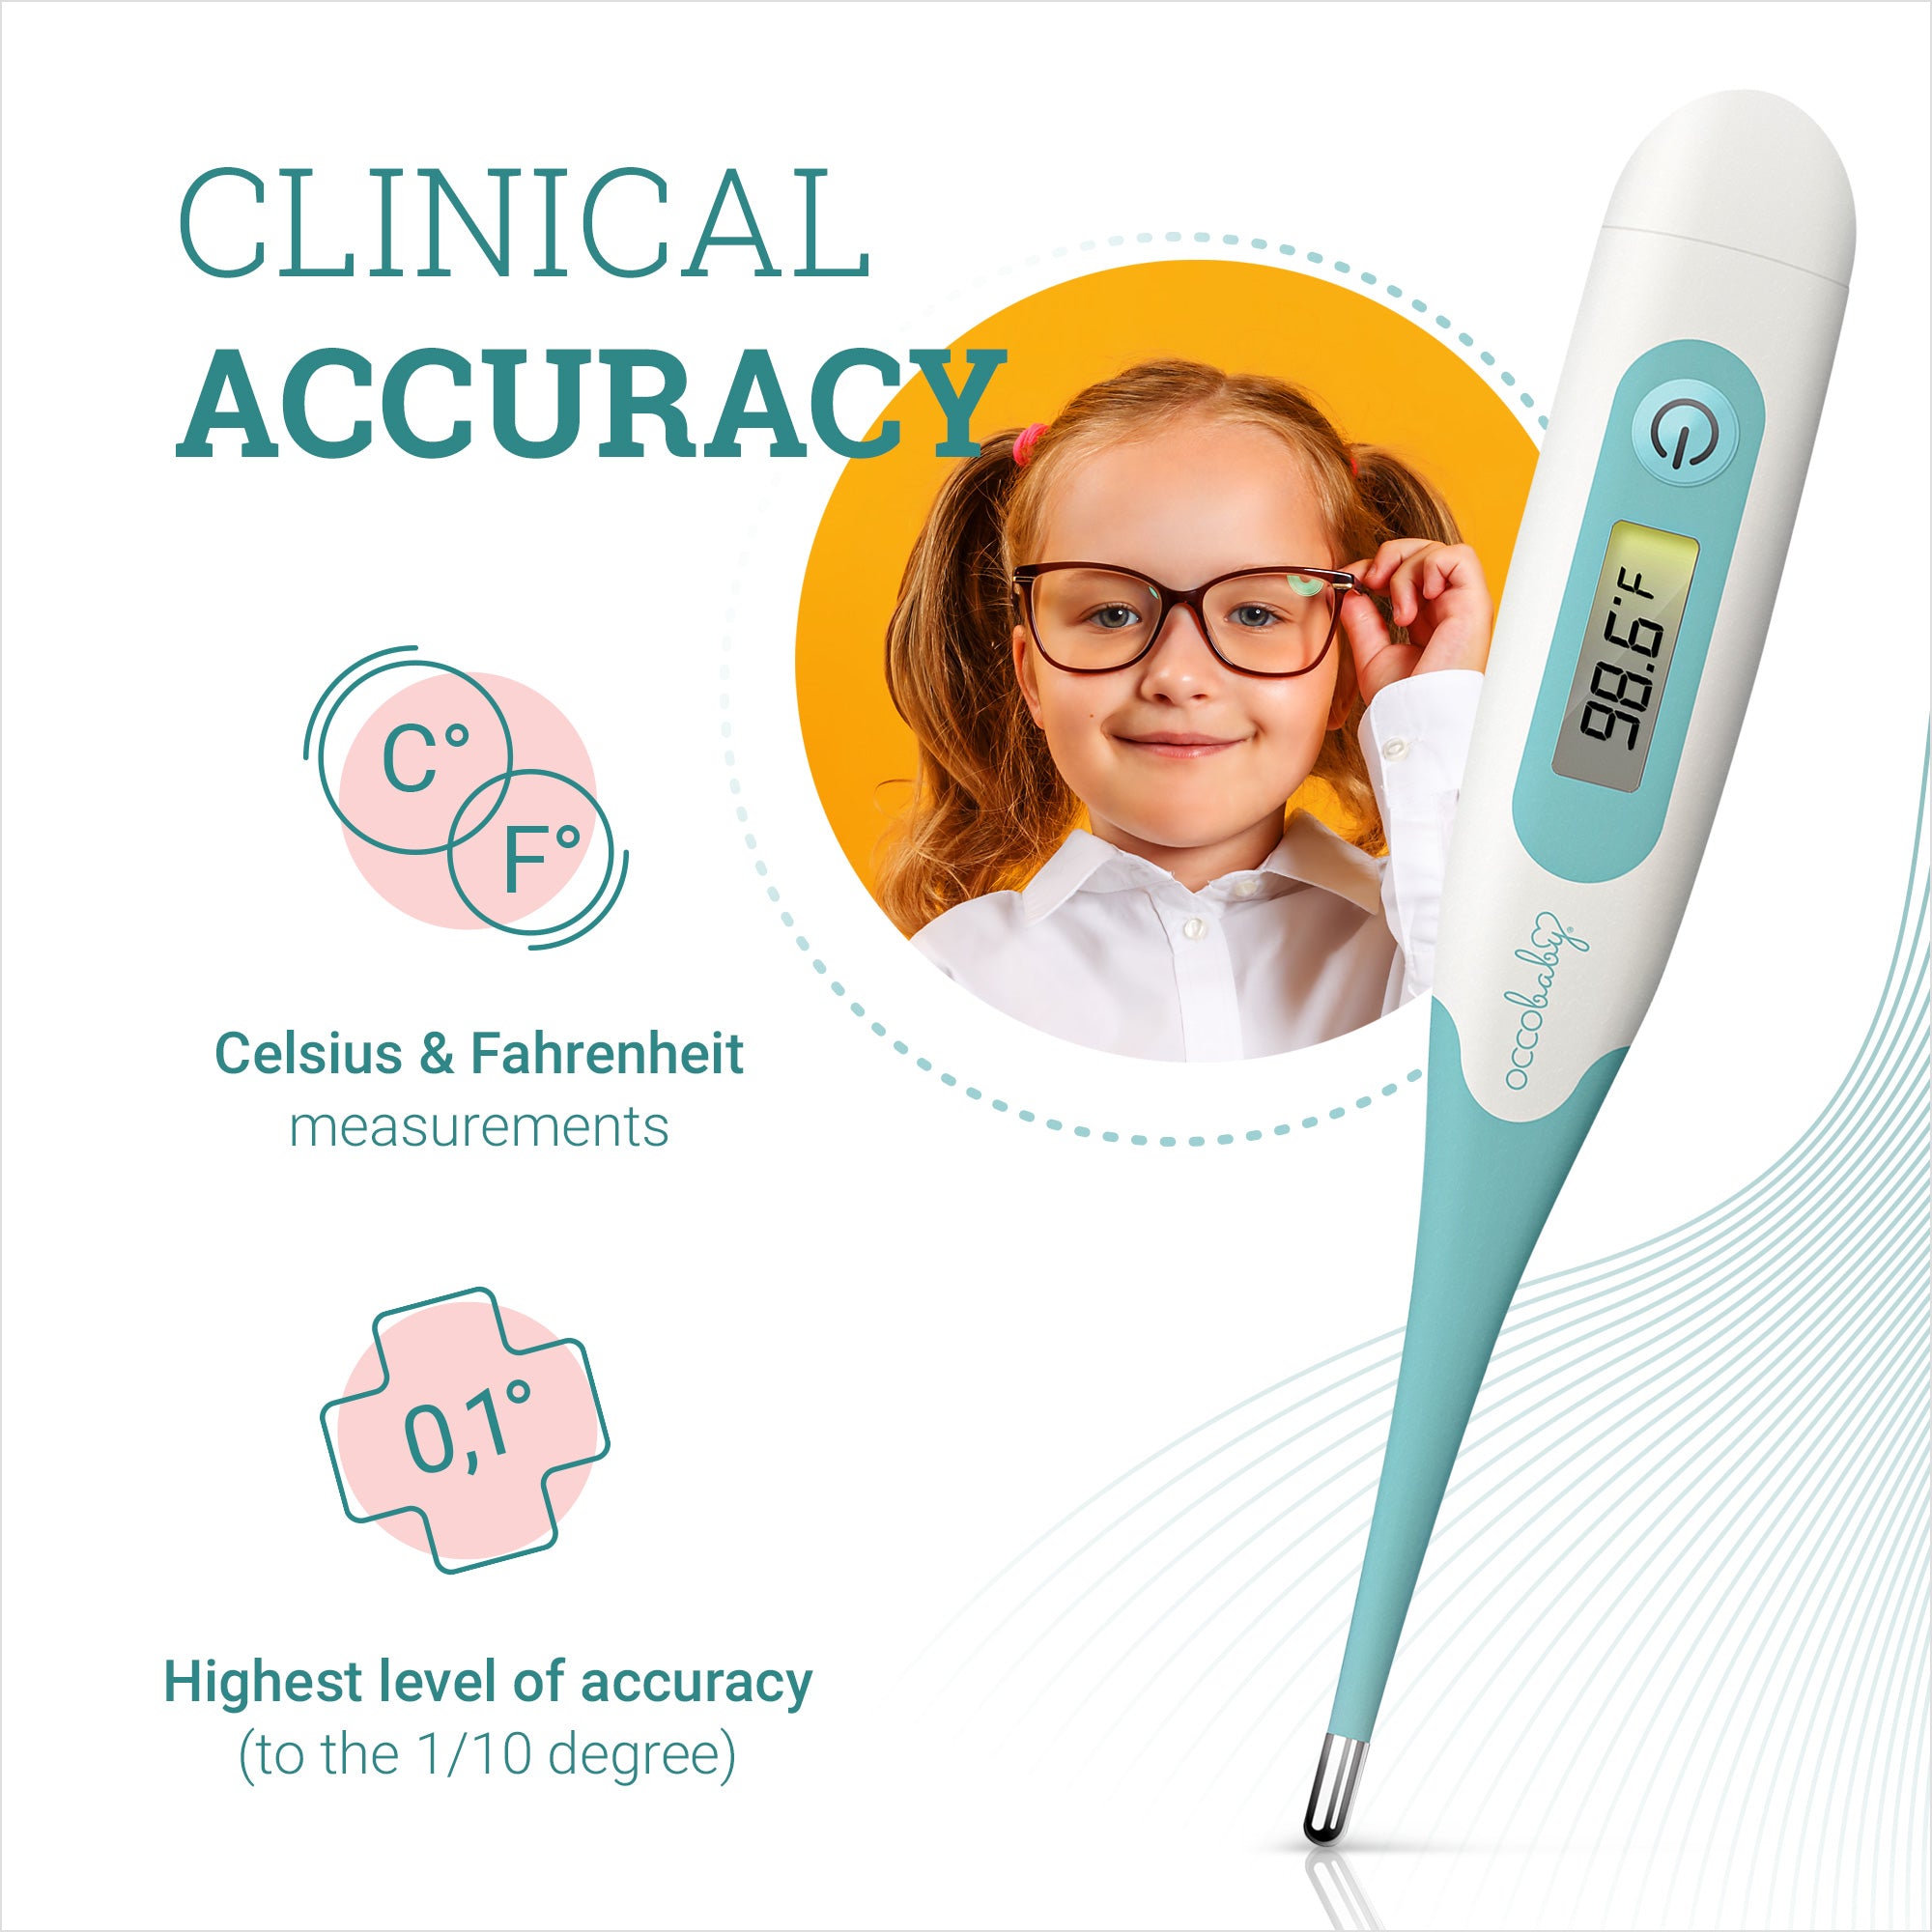 OCCObaby Clinical Digital Baby Thermometer - LCD, Flexible Tip, 10 Second  Quick Accurate Fever Alarm Rectal Oral & Underarm Use - Waterproof Baby